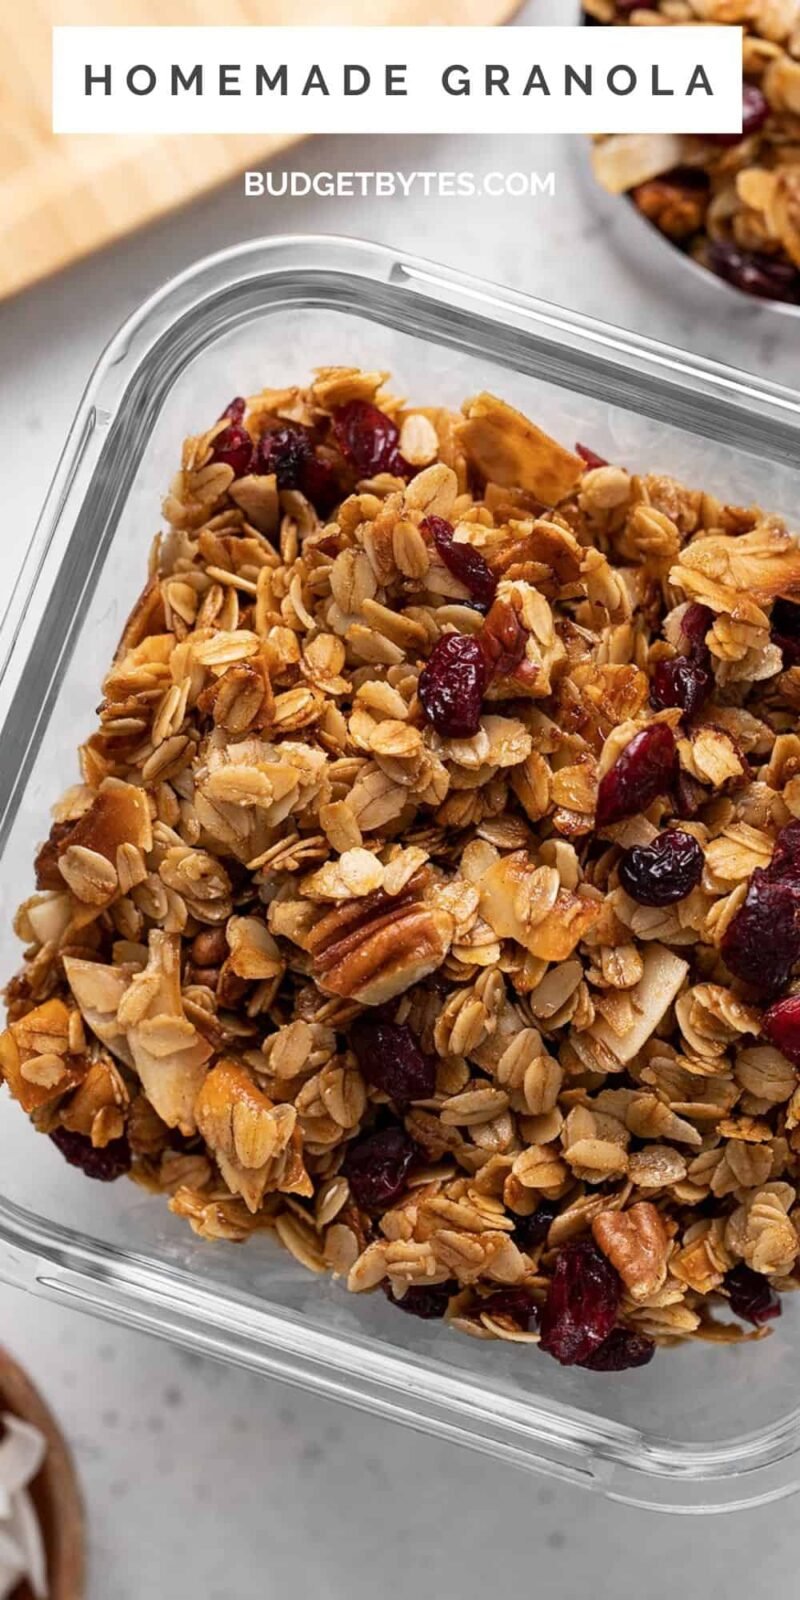 Overhead view of a glass container full of granola.